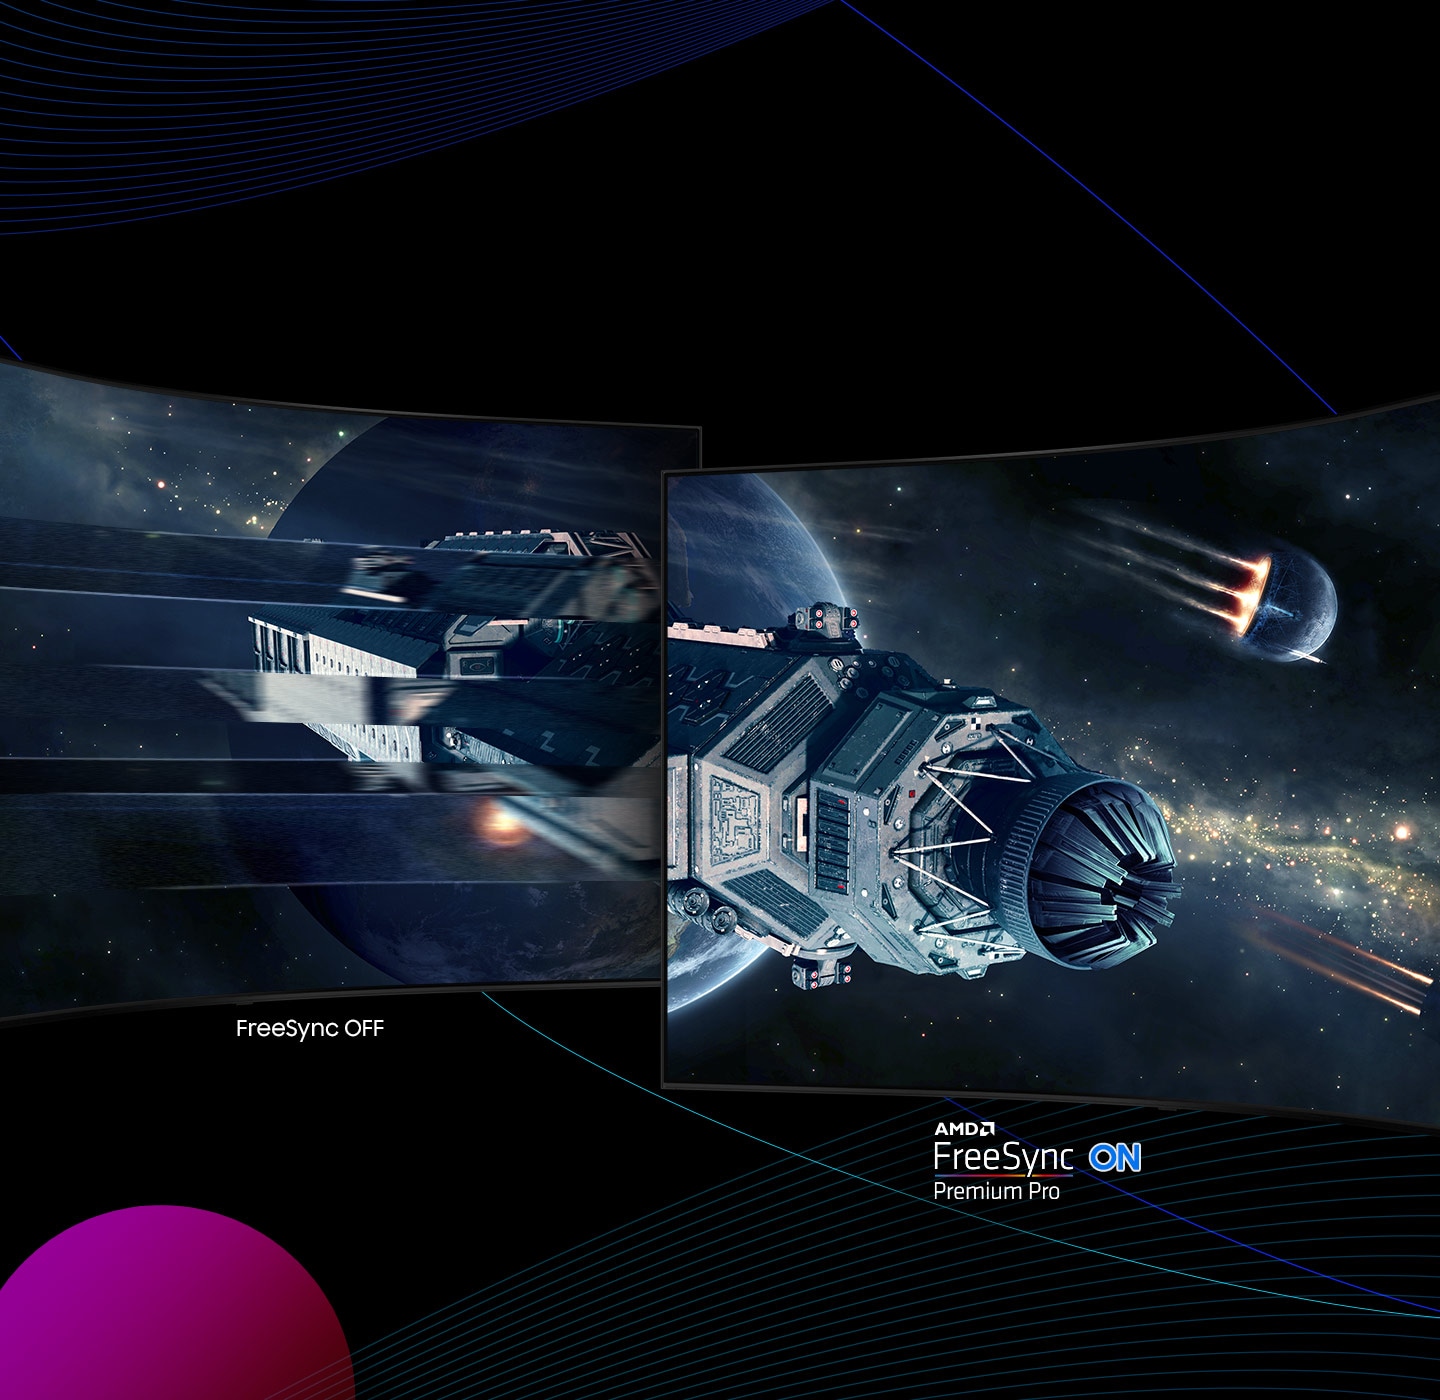 Two monitors side by side show a spaceship flying through space from left to right between the two screens. The left side shows 'FreeSync Off' while the right side shows 'AMD FreeSync Premium Pro On'.